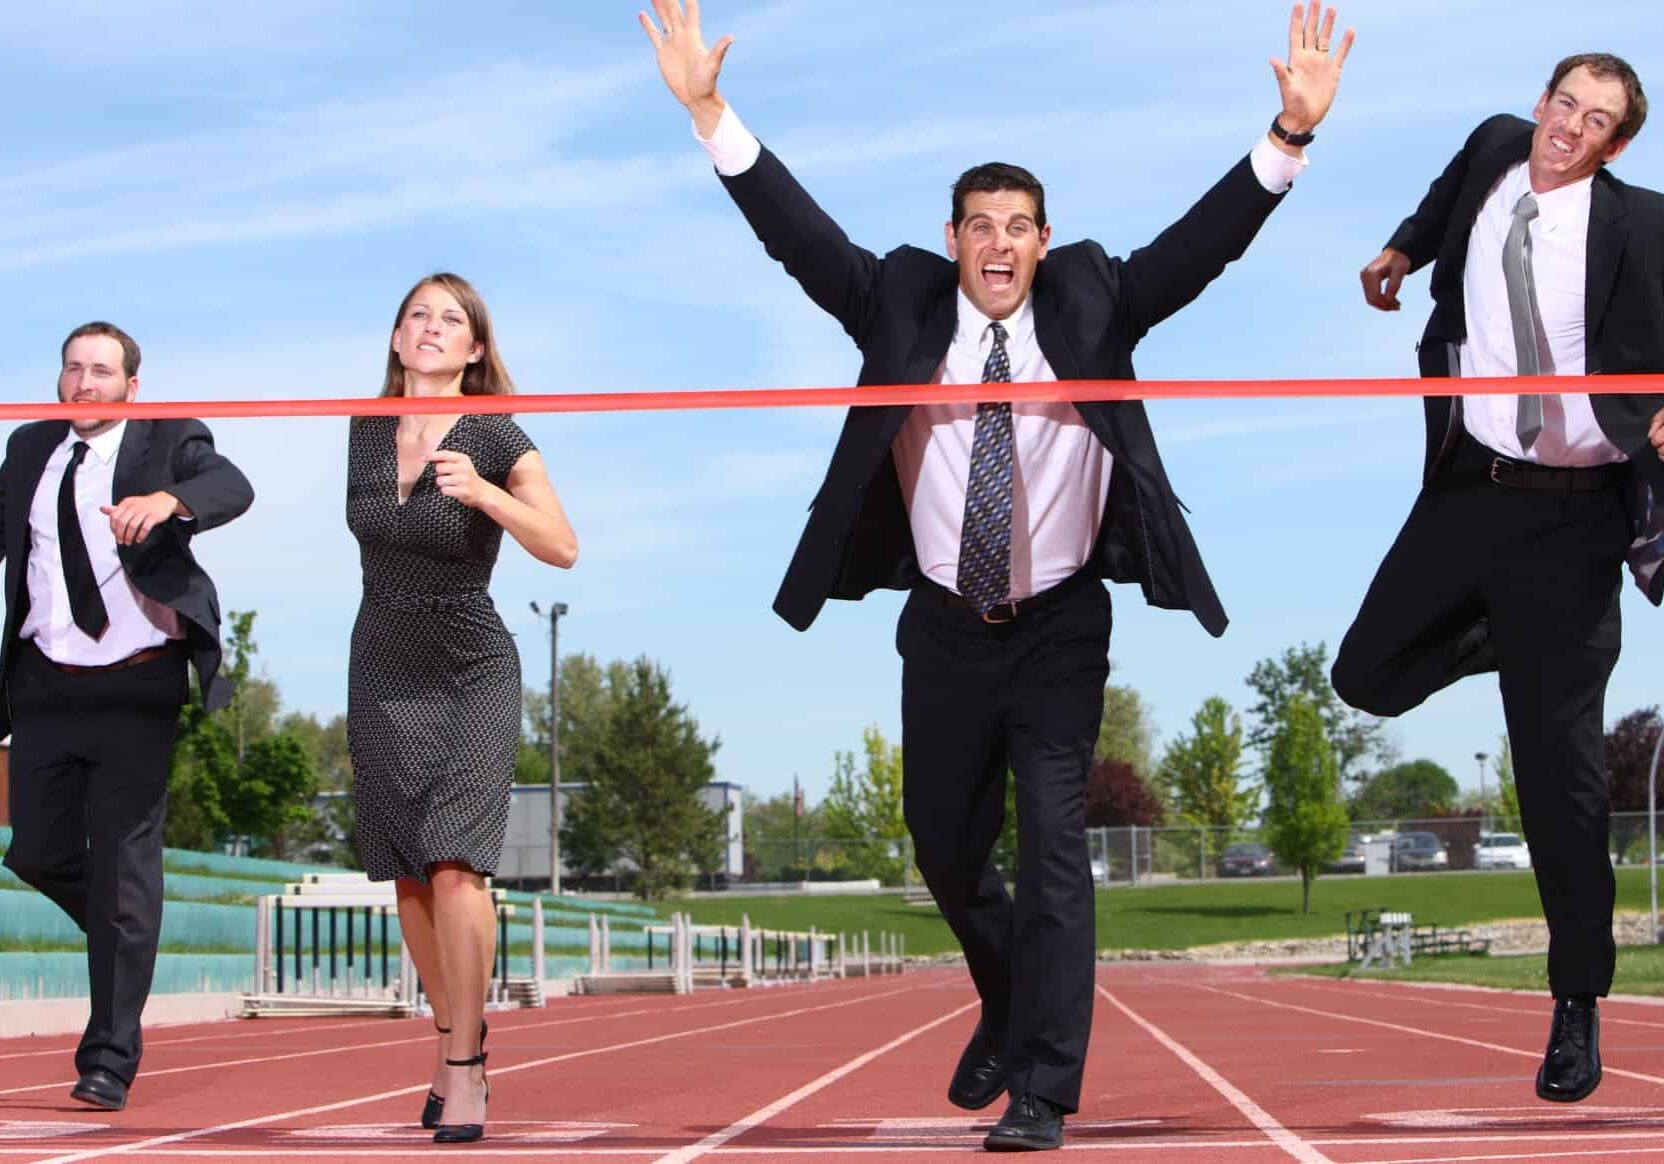 ASX 300 share investors in suits running a race on an athletics track